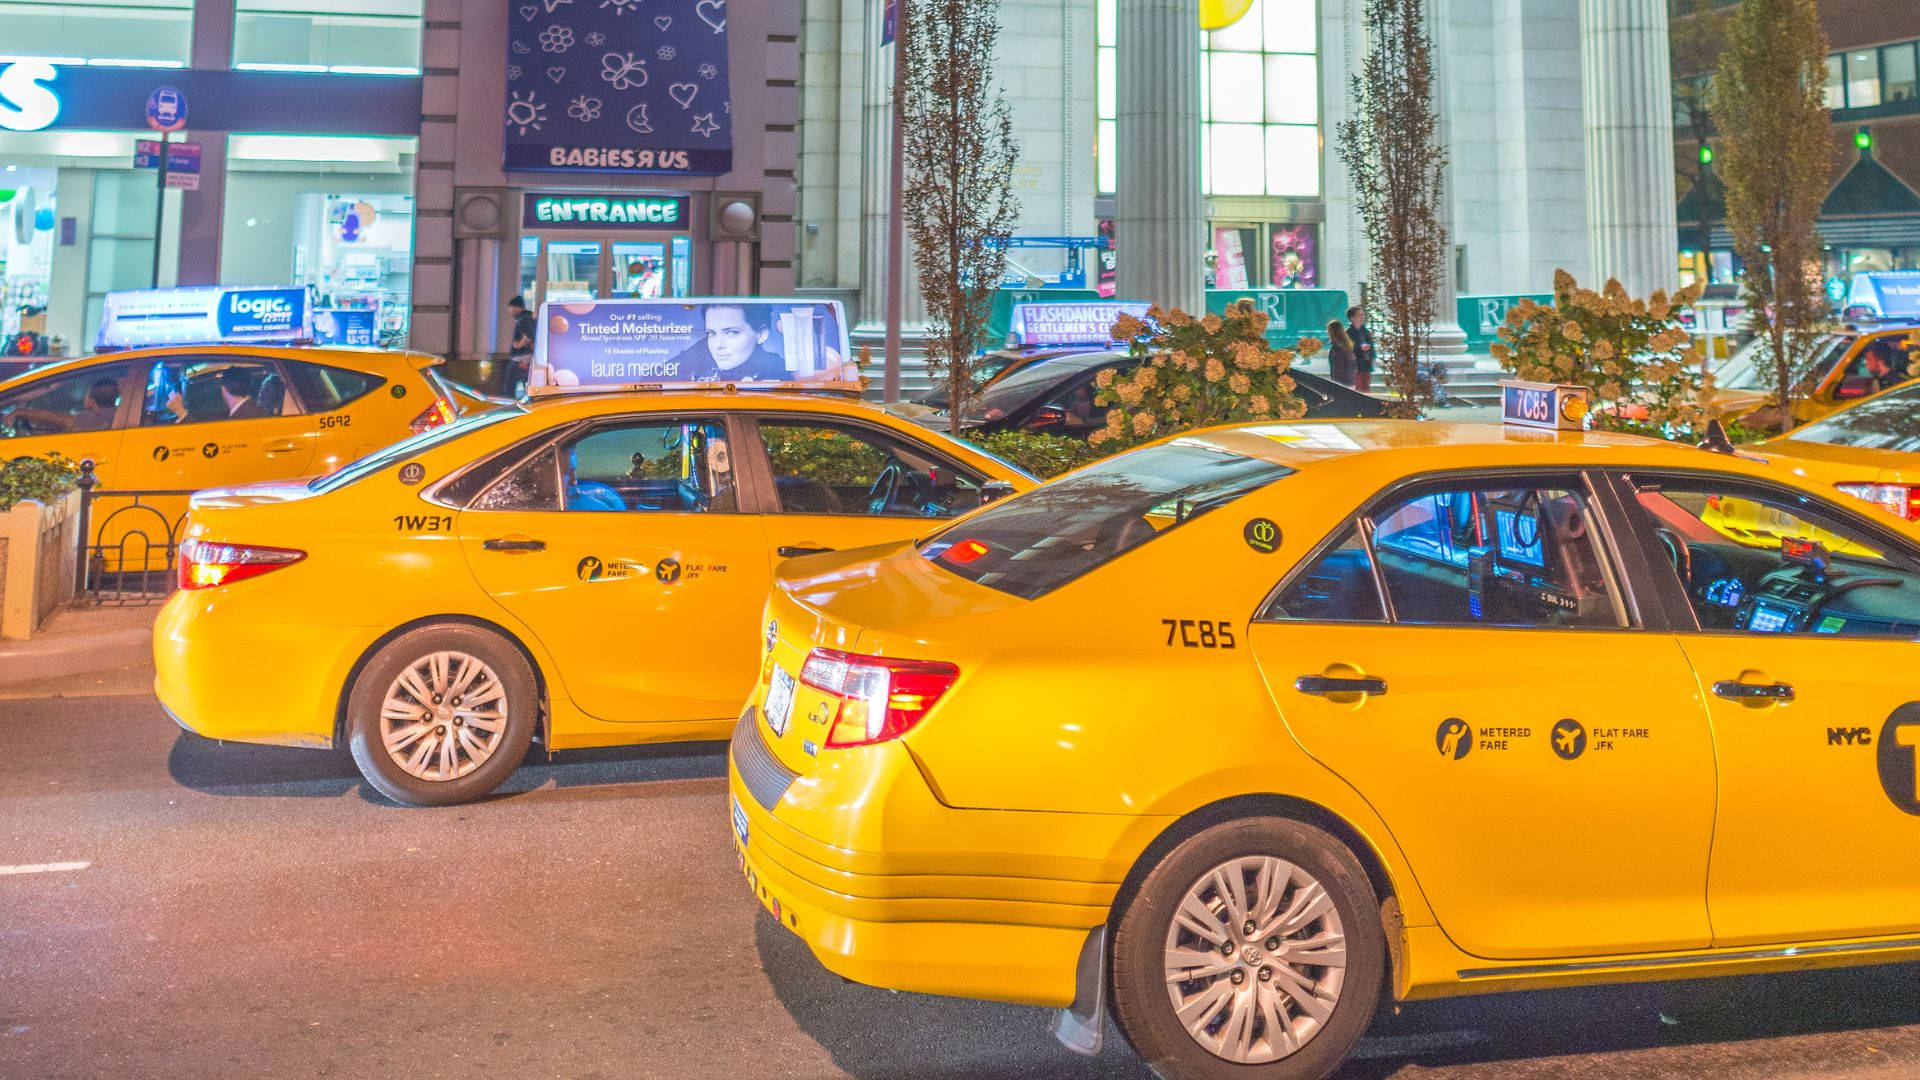 Yellow Taxi Cab In Front Of Mall